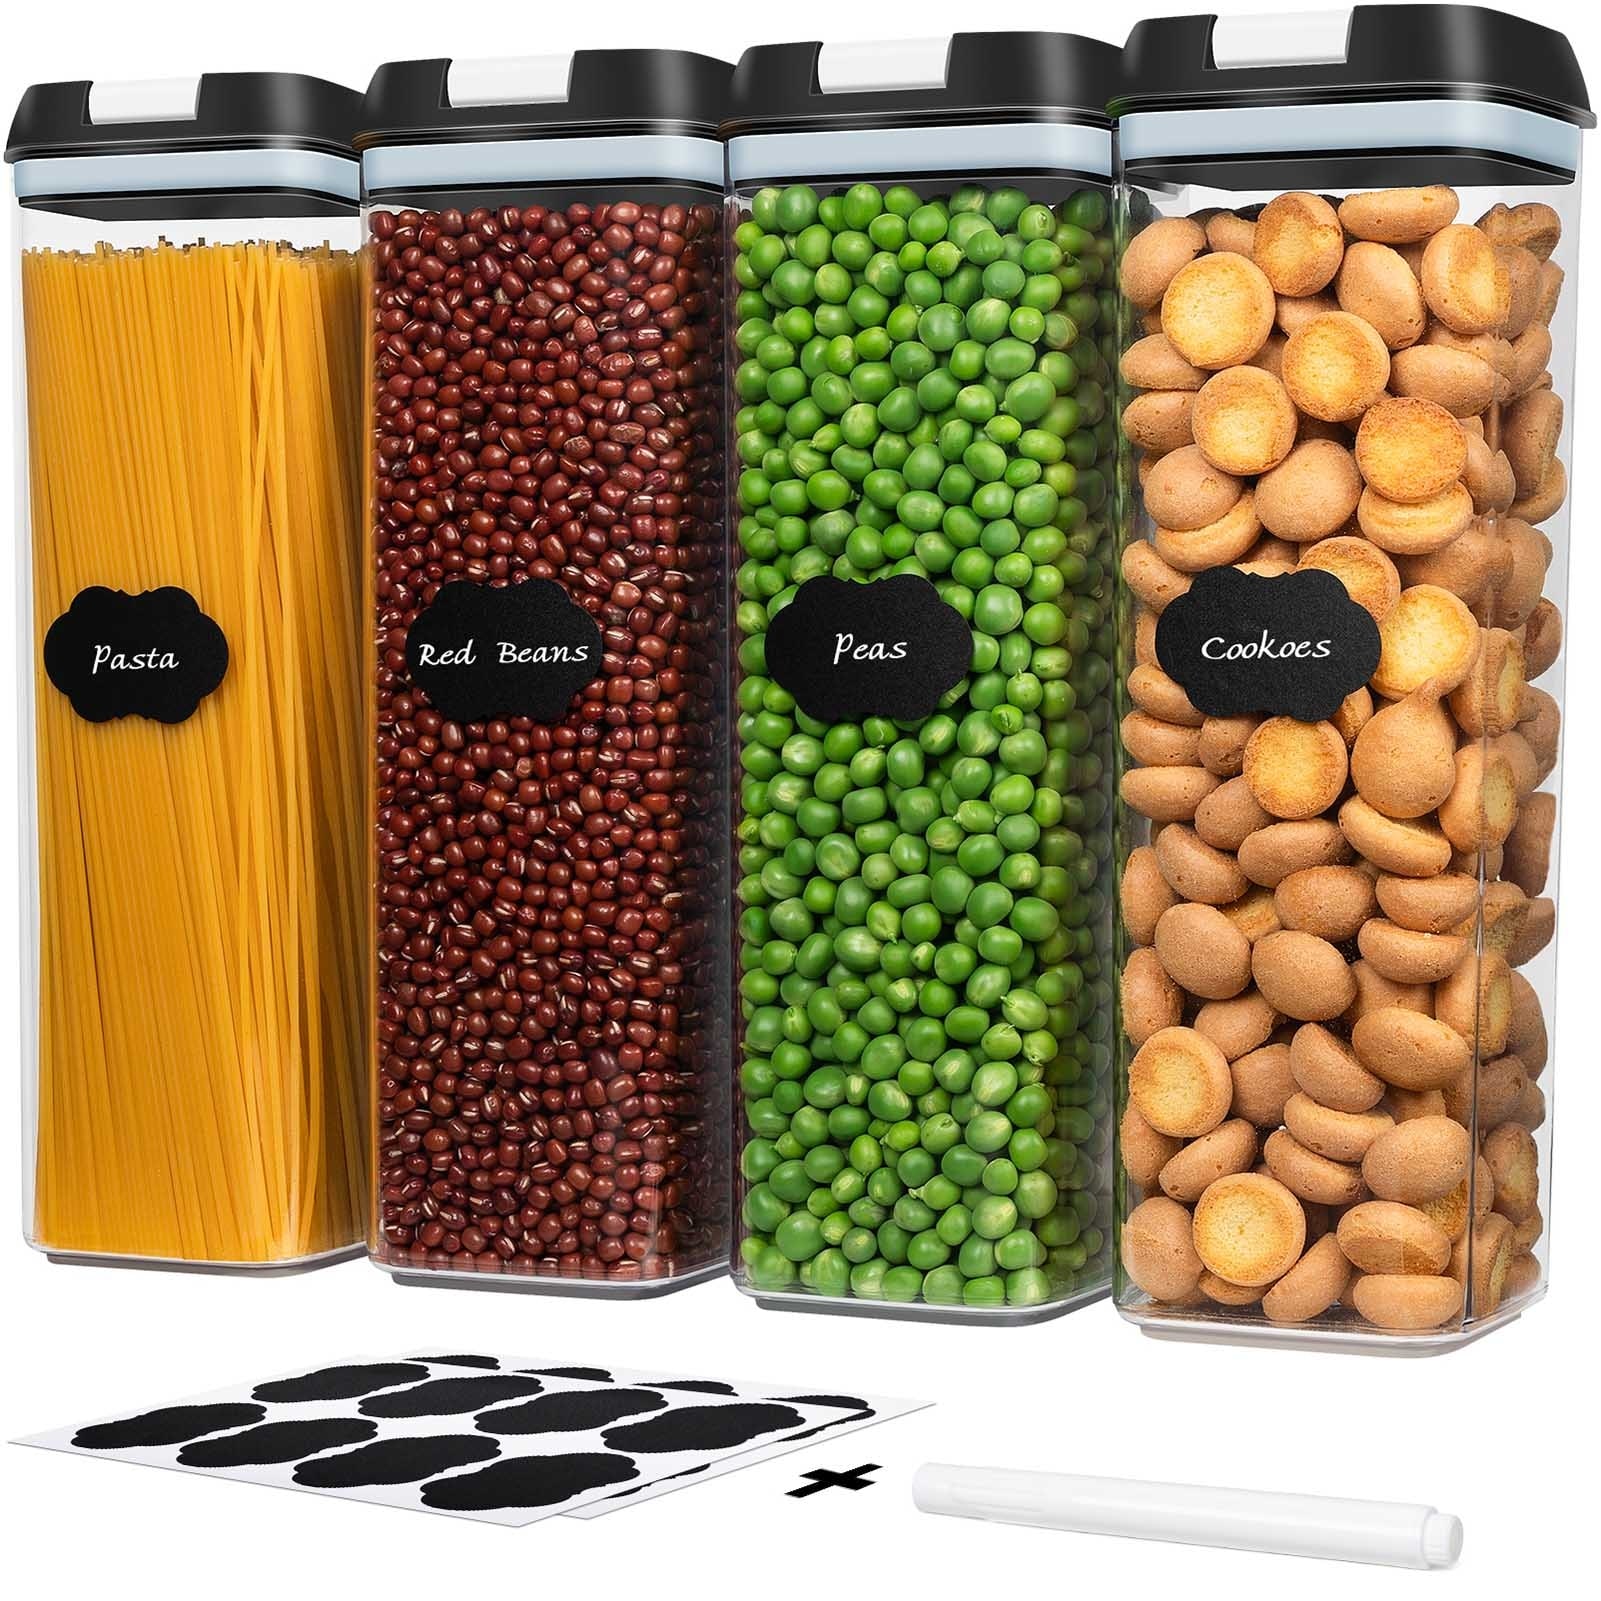 https://ak1.ostkcdn.com/images/products/is/images/direct/d54efc939d5b205de52b3c690ca75bde6b0d8d67/Kitchen-Food-Storage-Container-Pantry-Organization-Set---4-Pack.jpg